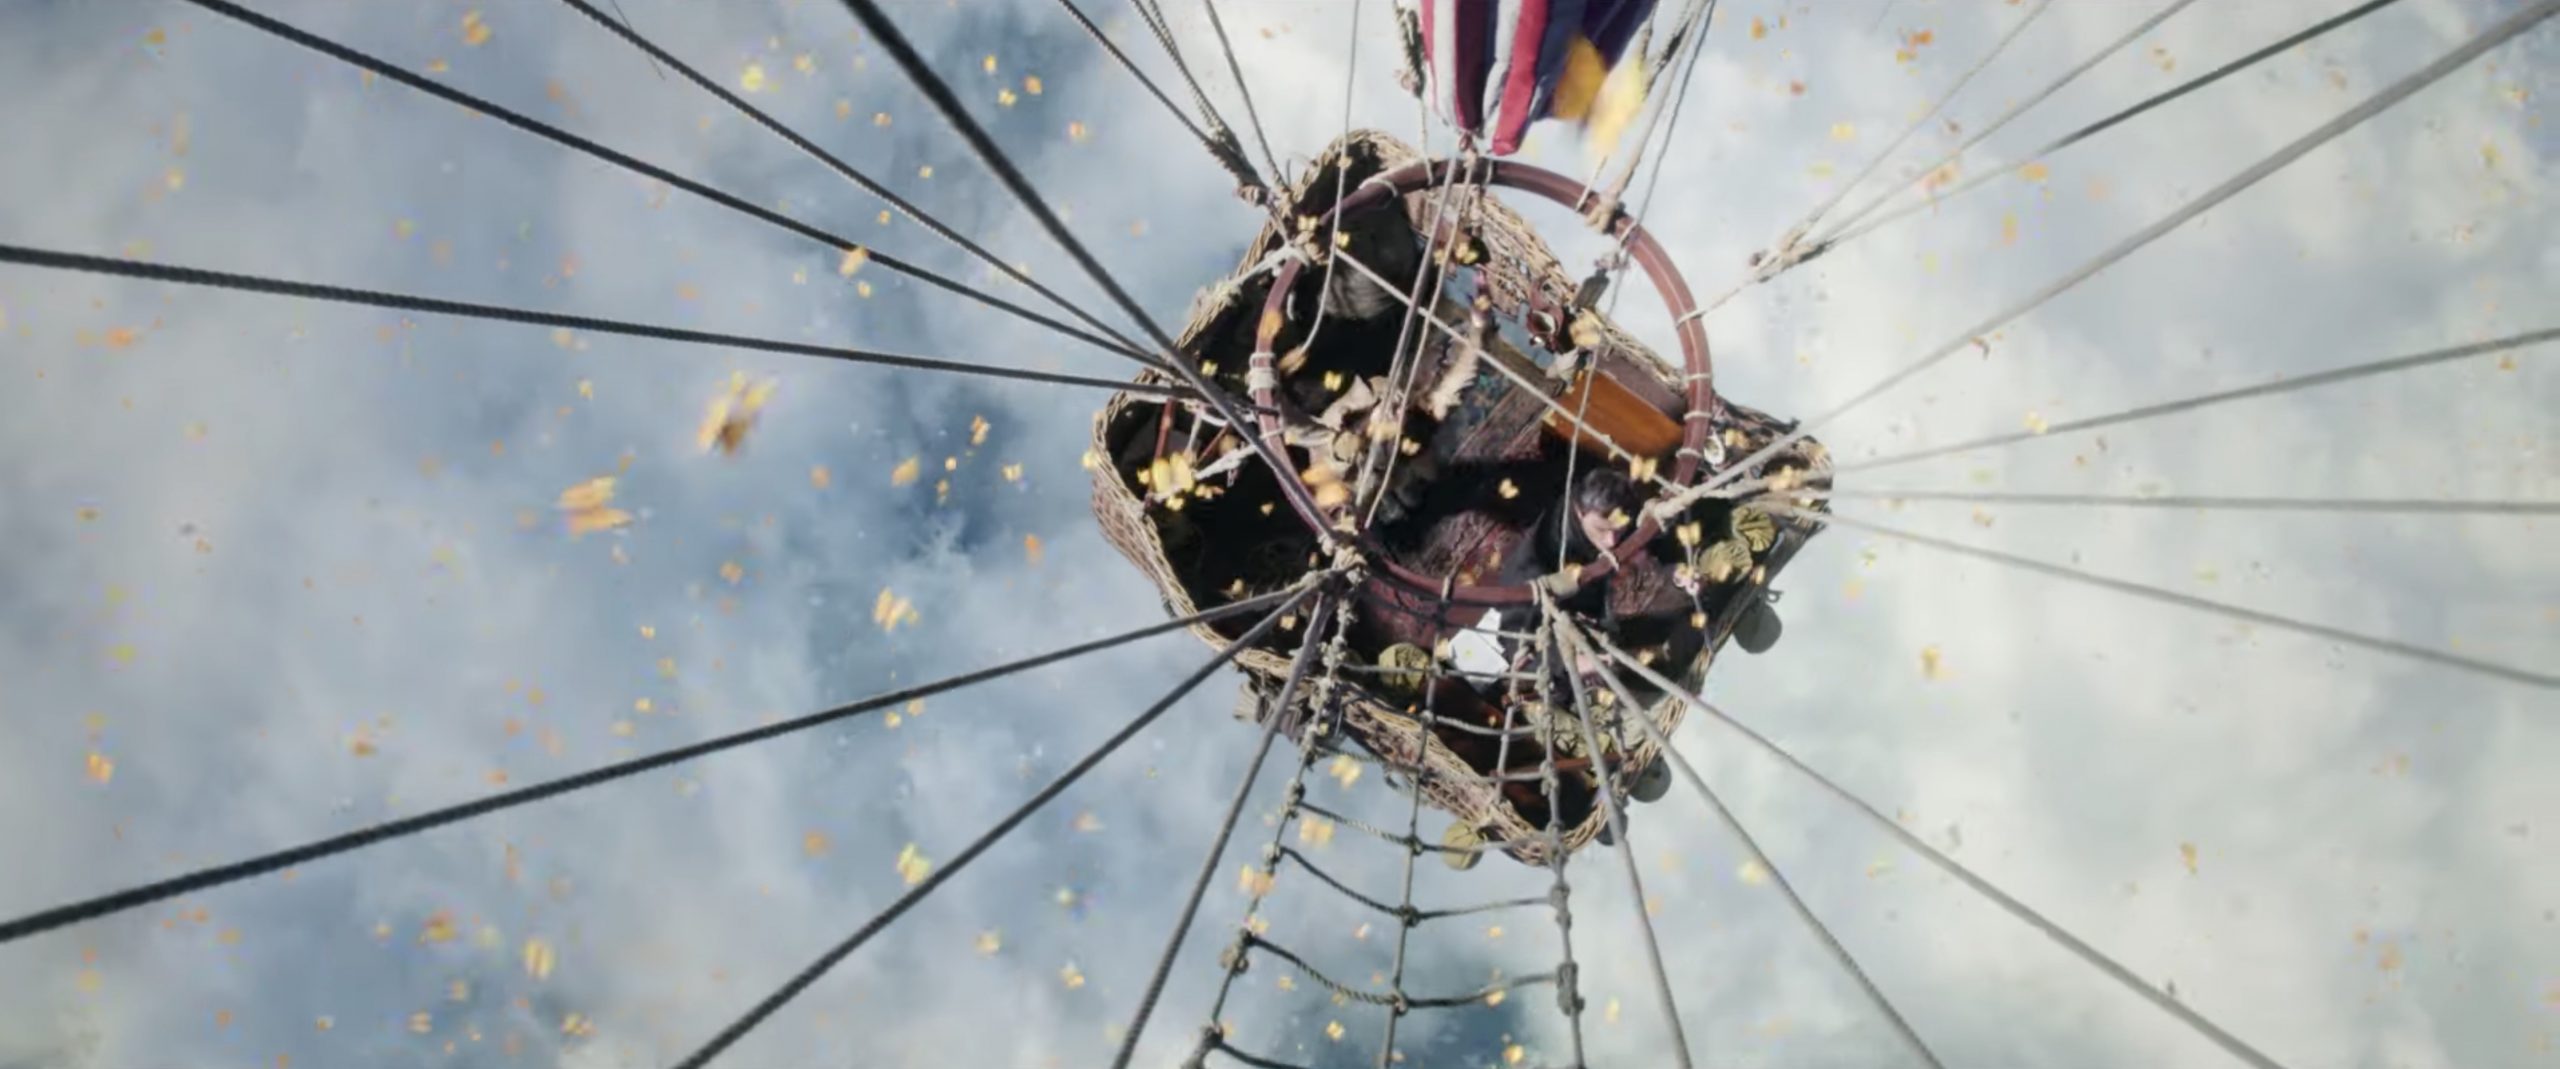 Exclusive: VFX Supervisor Louis Morin on Using Real and Digital Butterflies for The Aeronauts